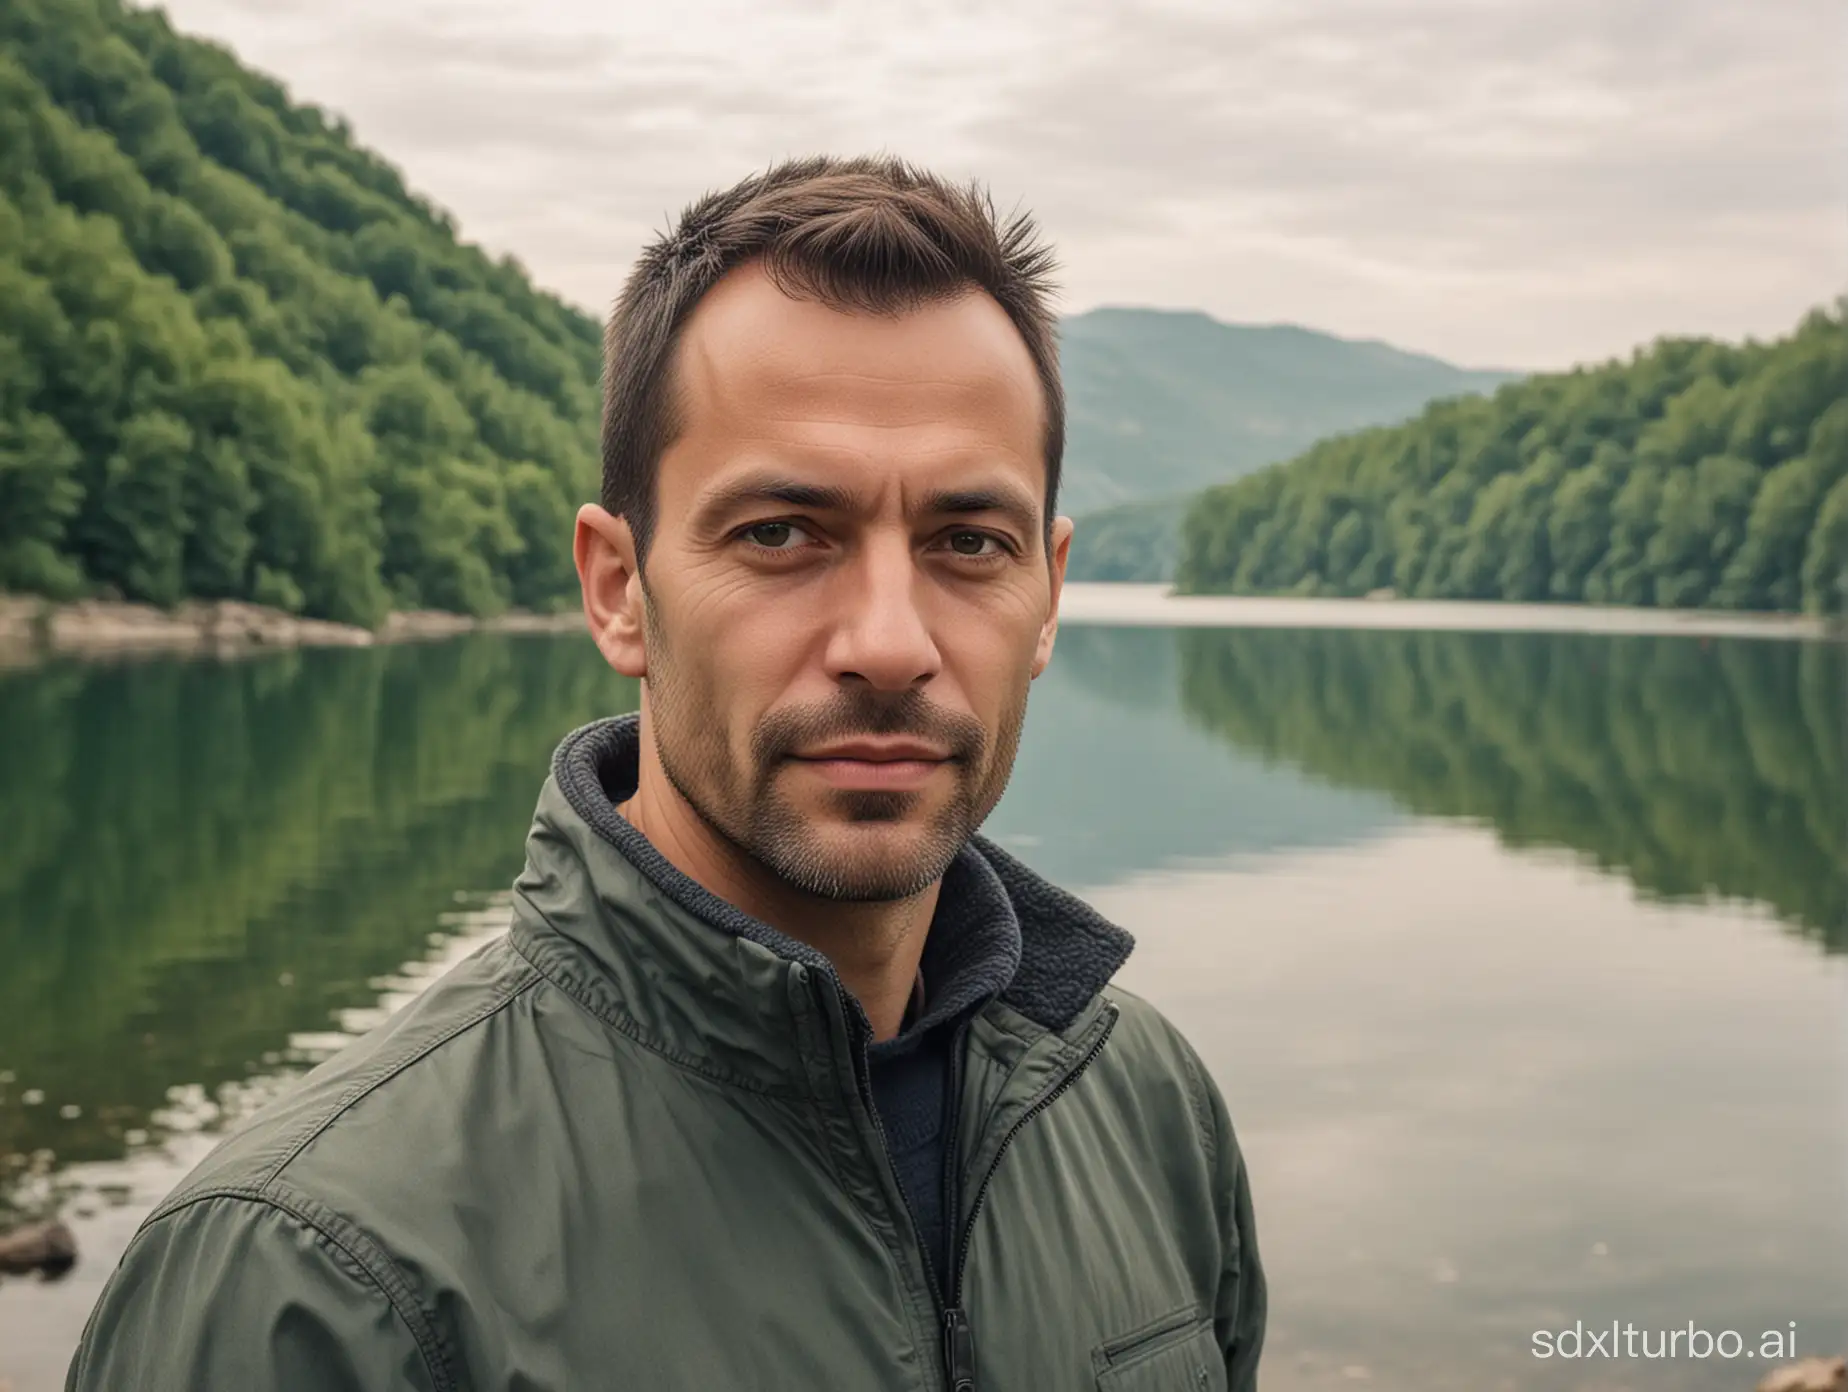 portrait of an Eastern European man in his thirties with a lake in the background